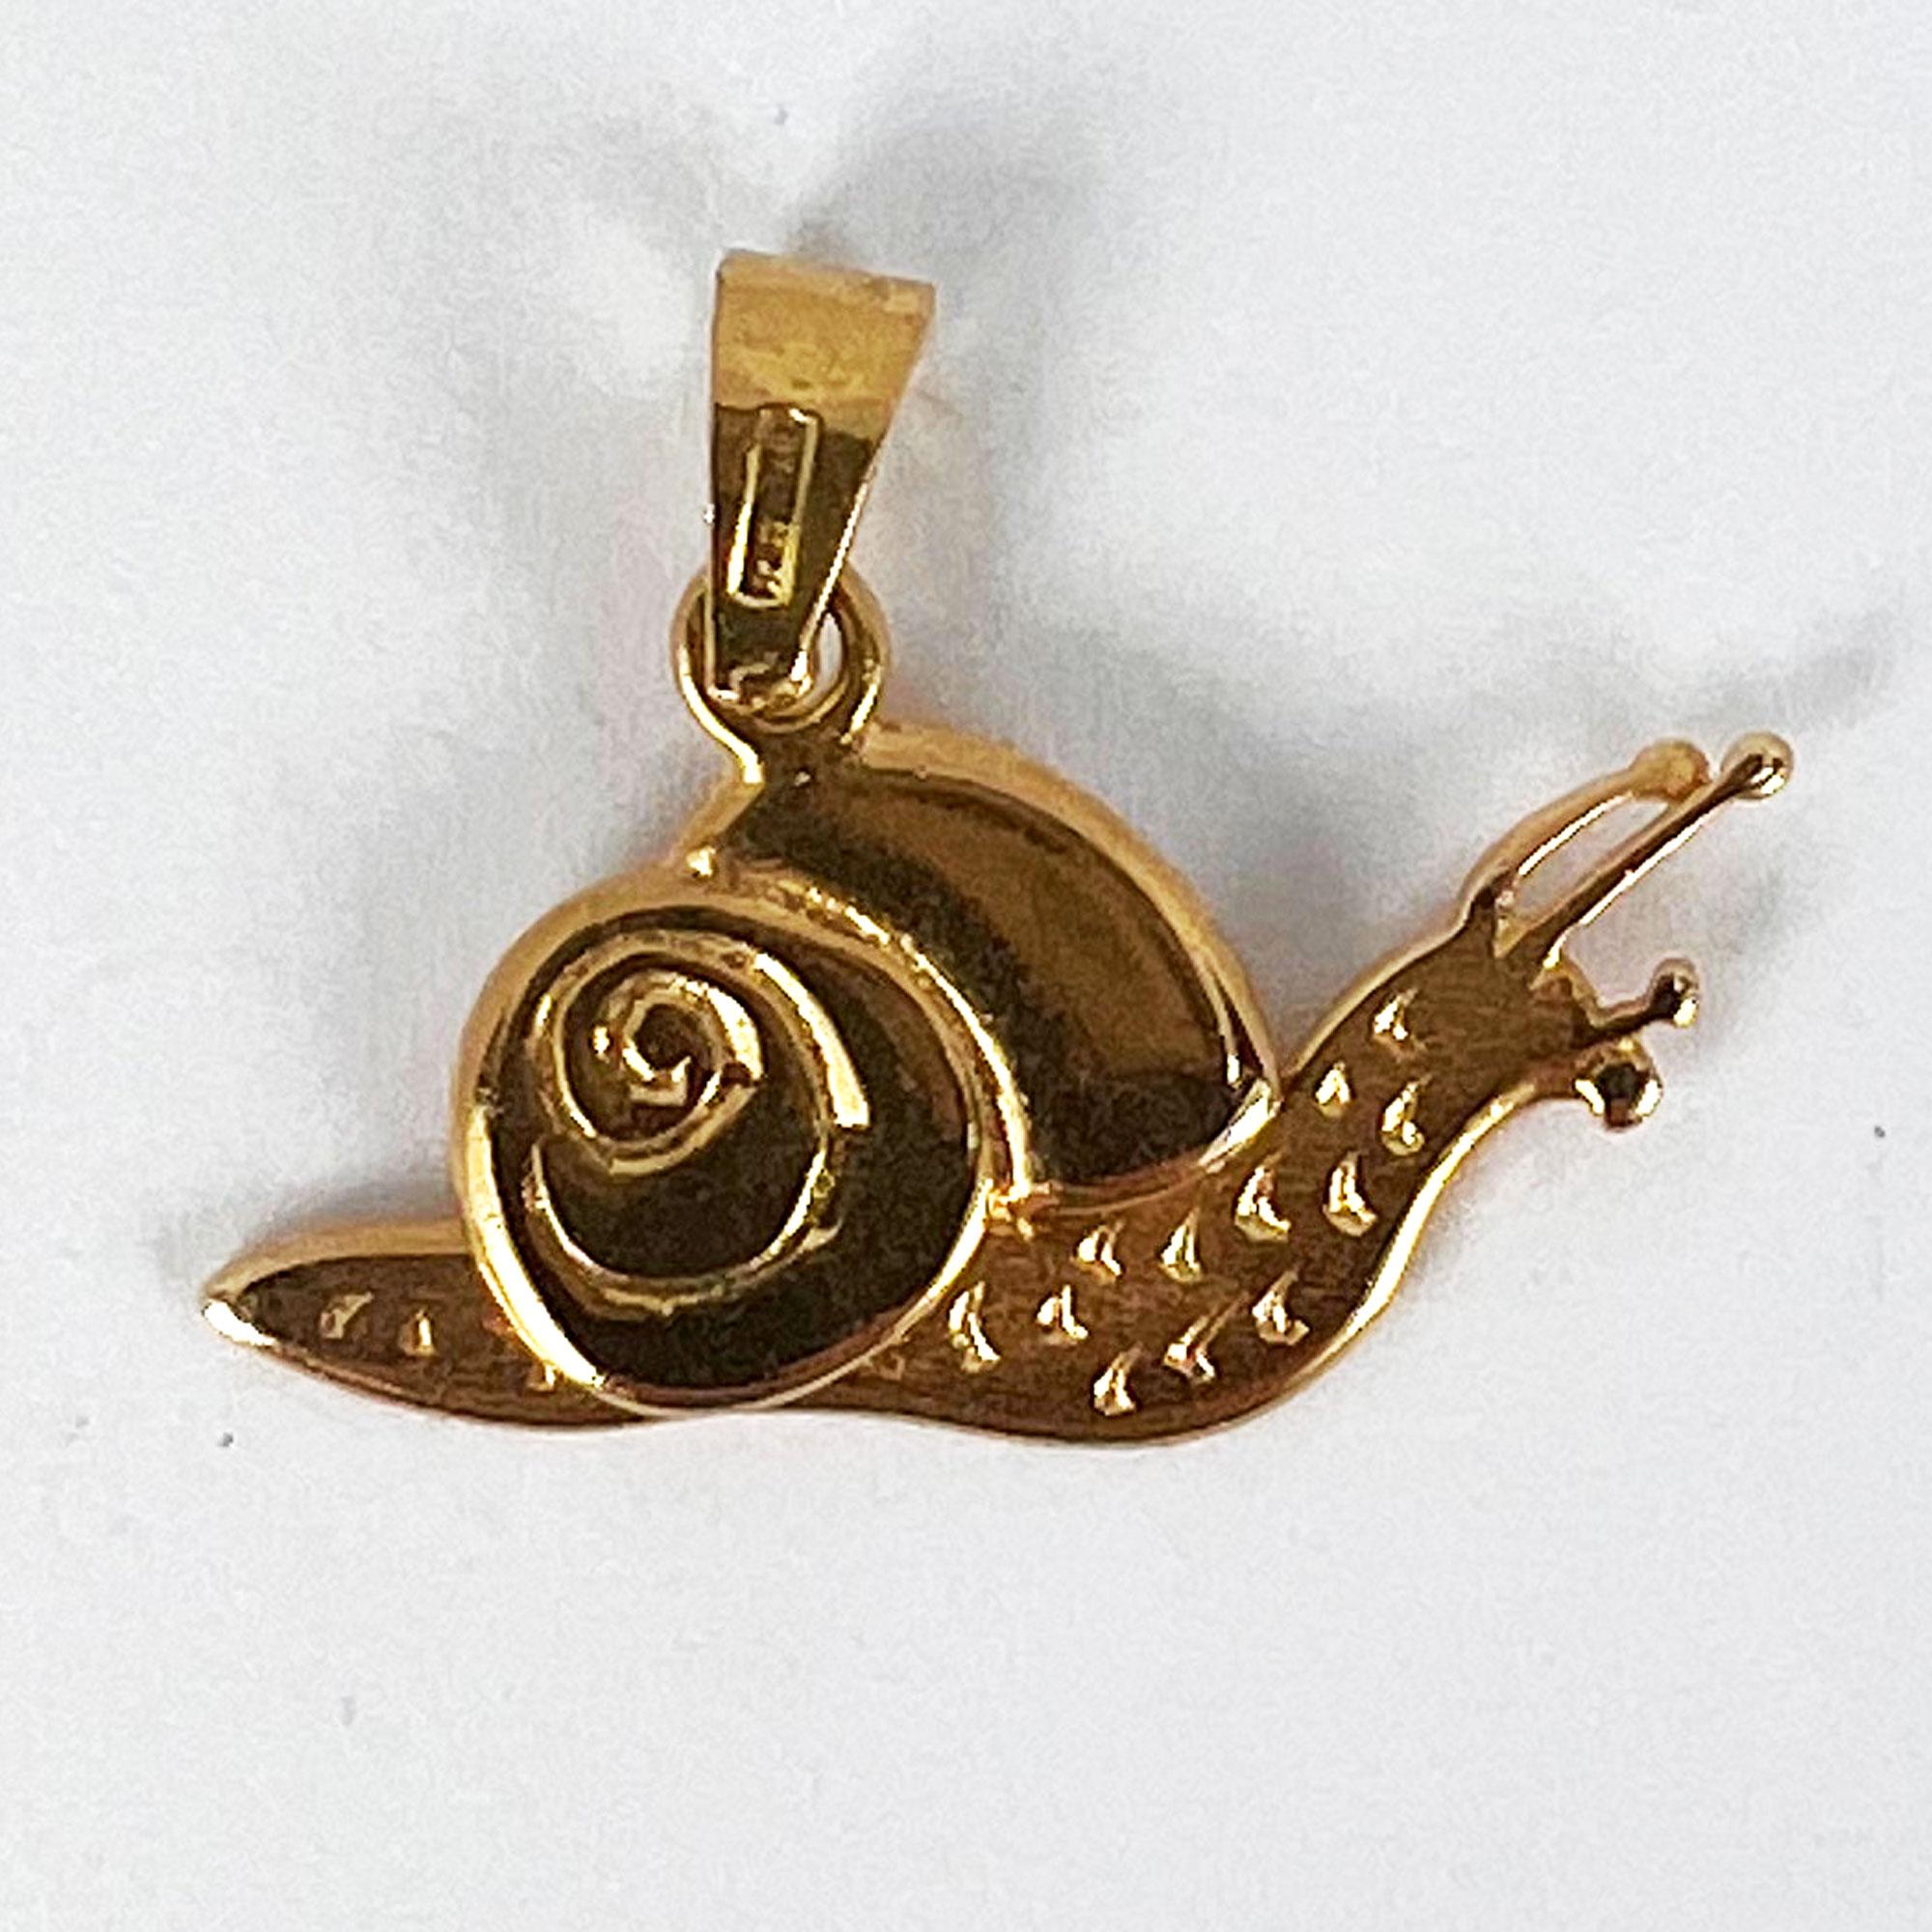 Articulated Snail 18K Yellow Gold Charm Pendant 4